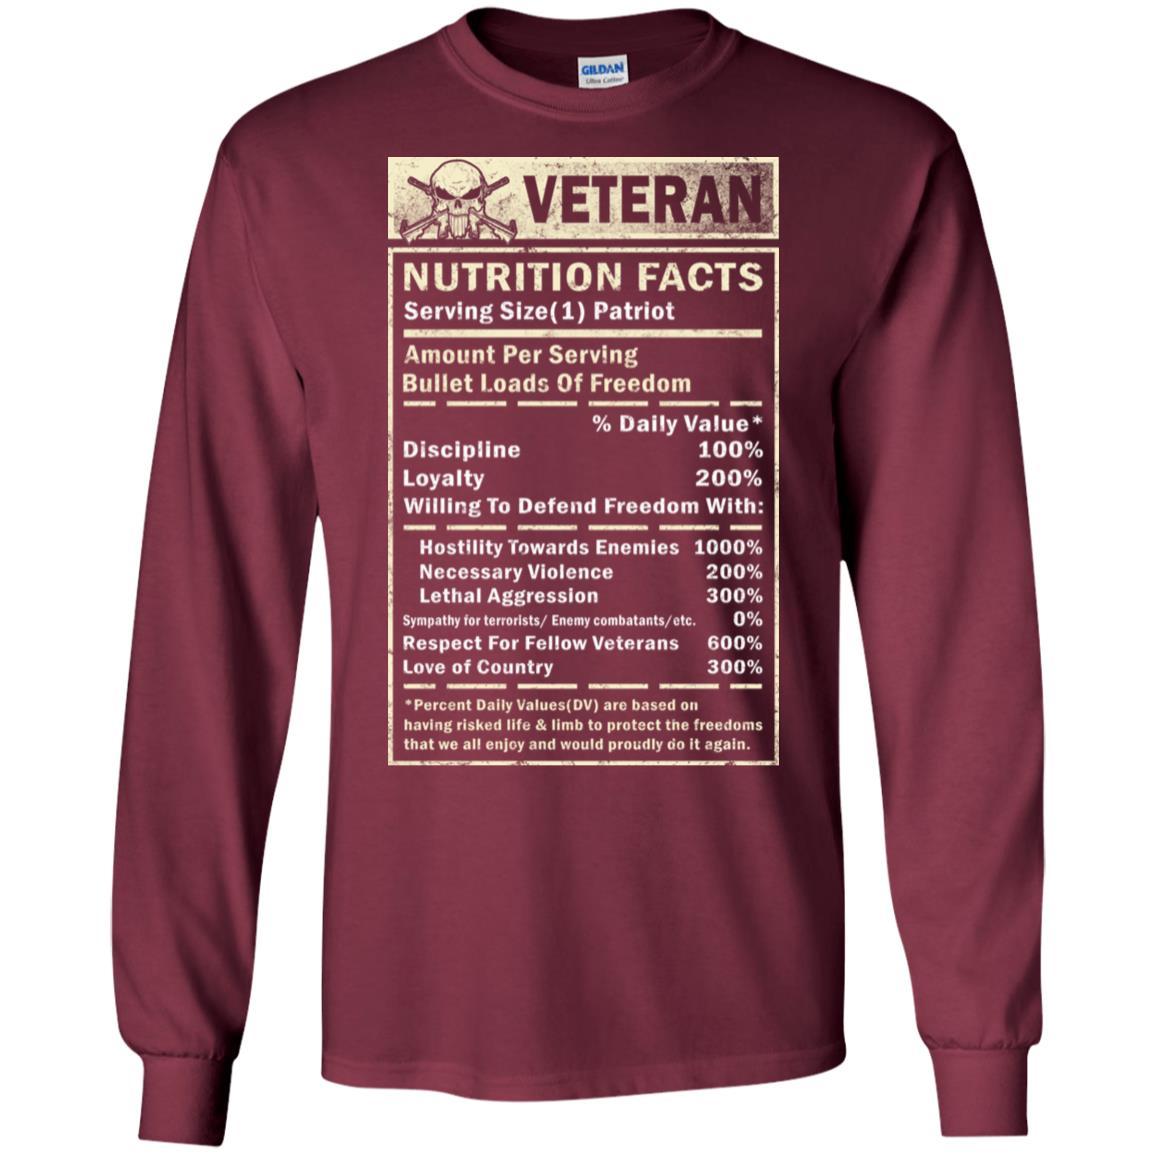 Military T-Shirt "VETERAN NUTRITION FACTS On" Front-TShirt-General-Veterans Nation